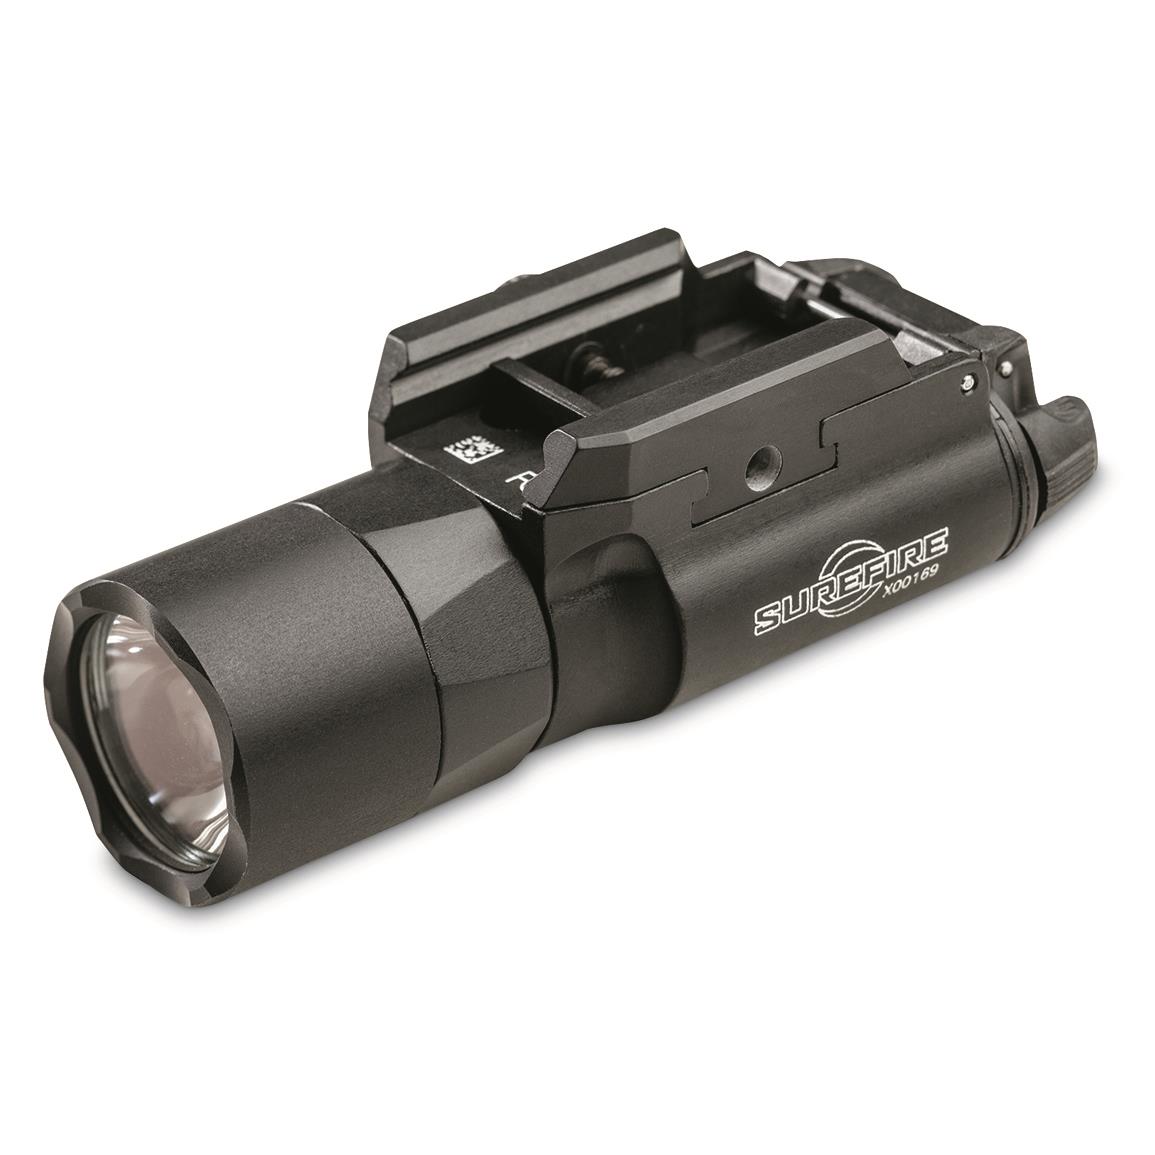 SureFire X300 Ultra Tactical Weapon Light with T-slot Mounting System